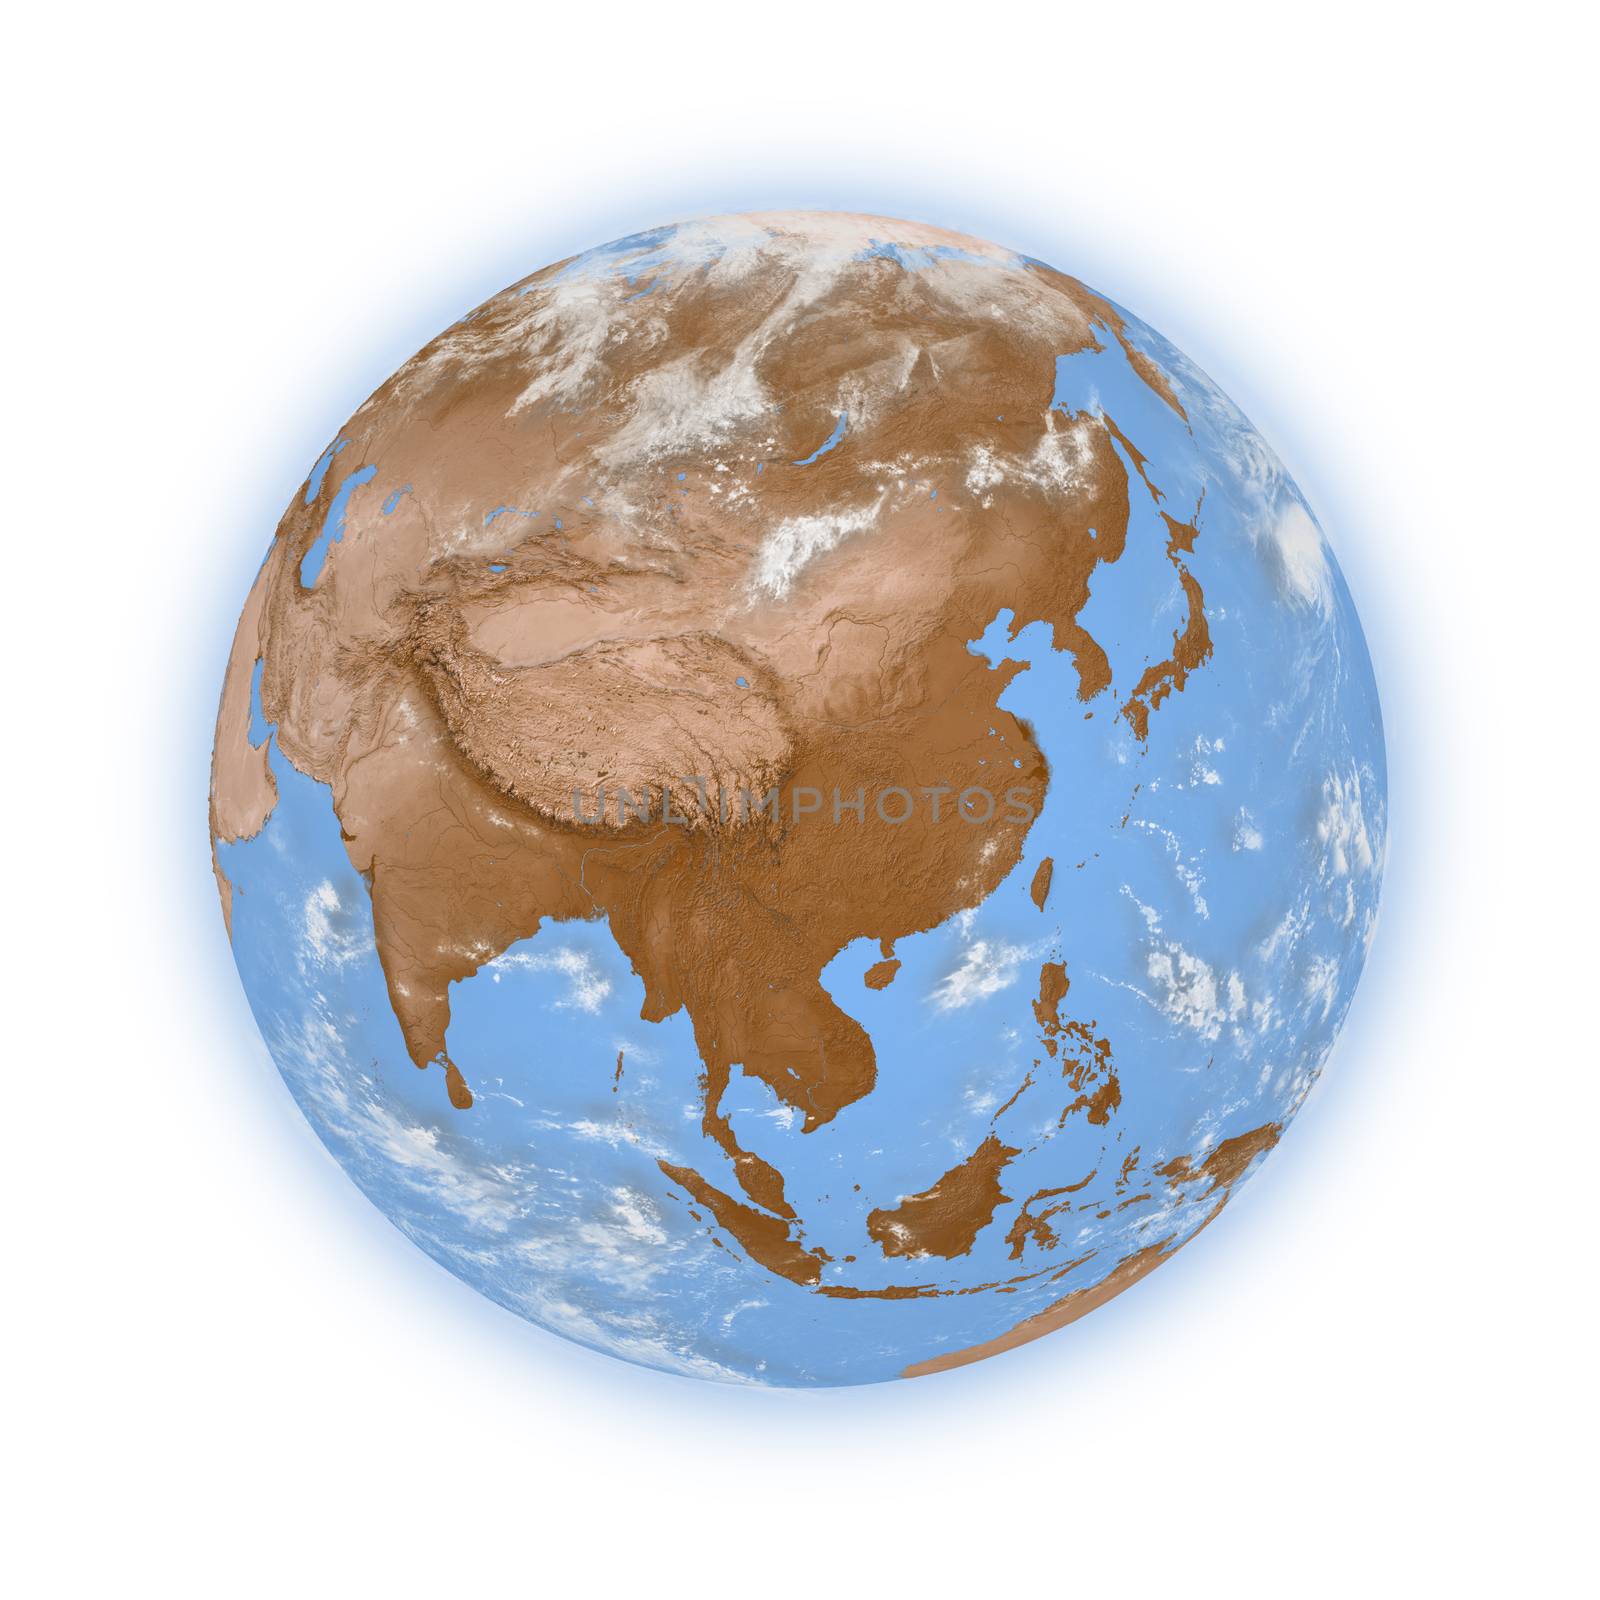 Southeast Asia on blue planet Earth isolated on white background. Highly detailed planet surface. Elements of this image furnished by NASA.